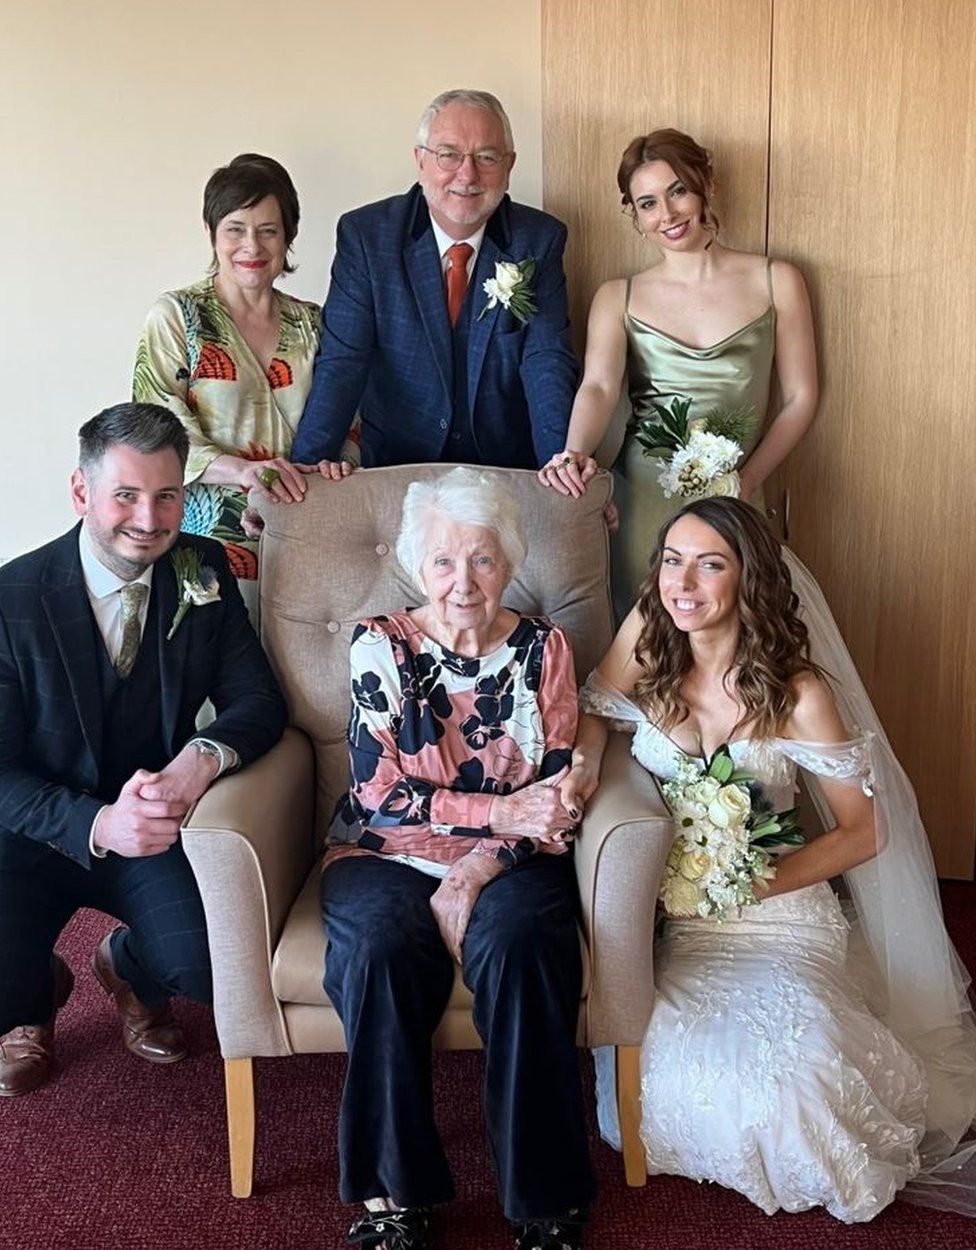 Hannah and her family wearing their wedding outfits alongside Liz Jobey